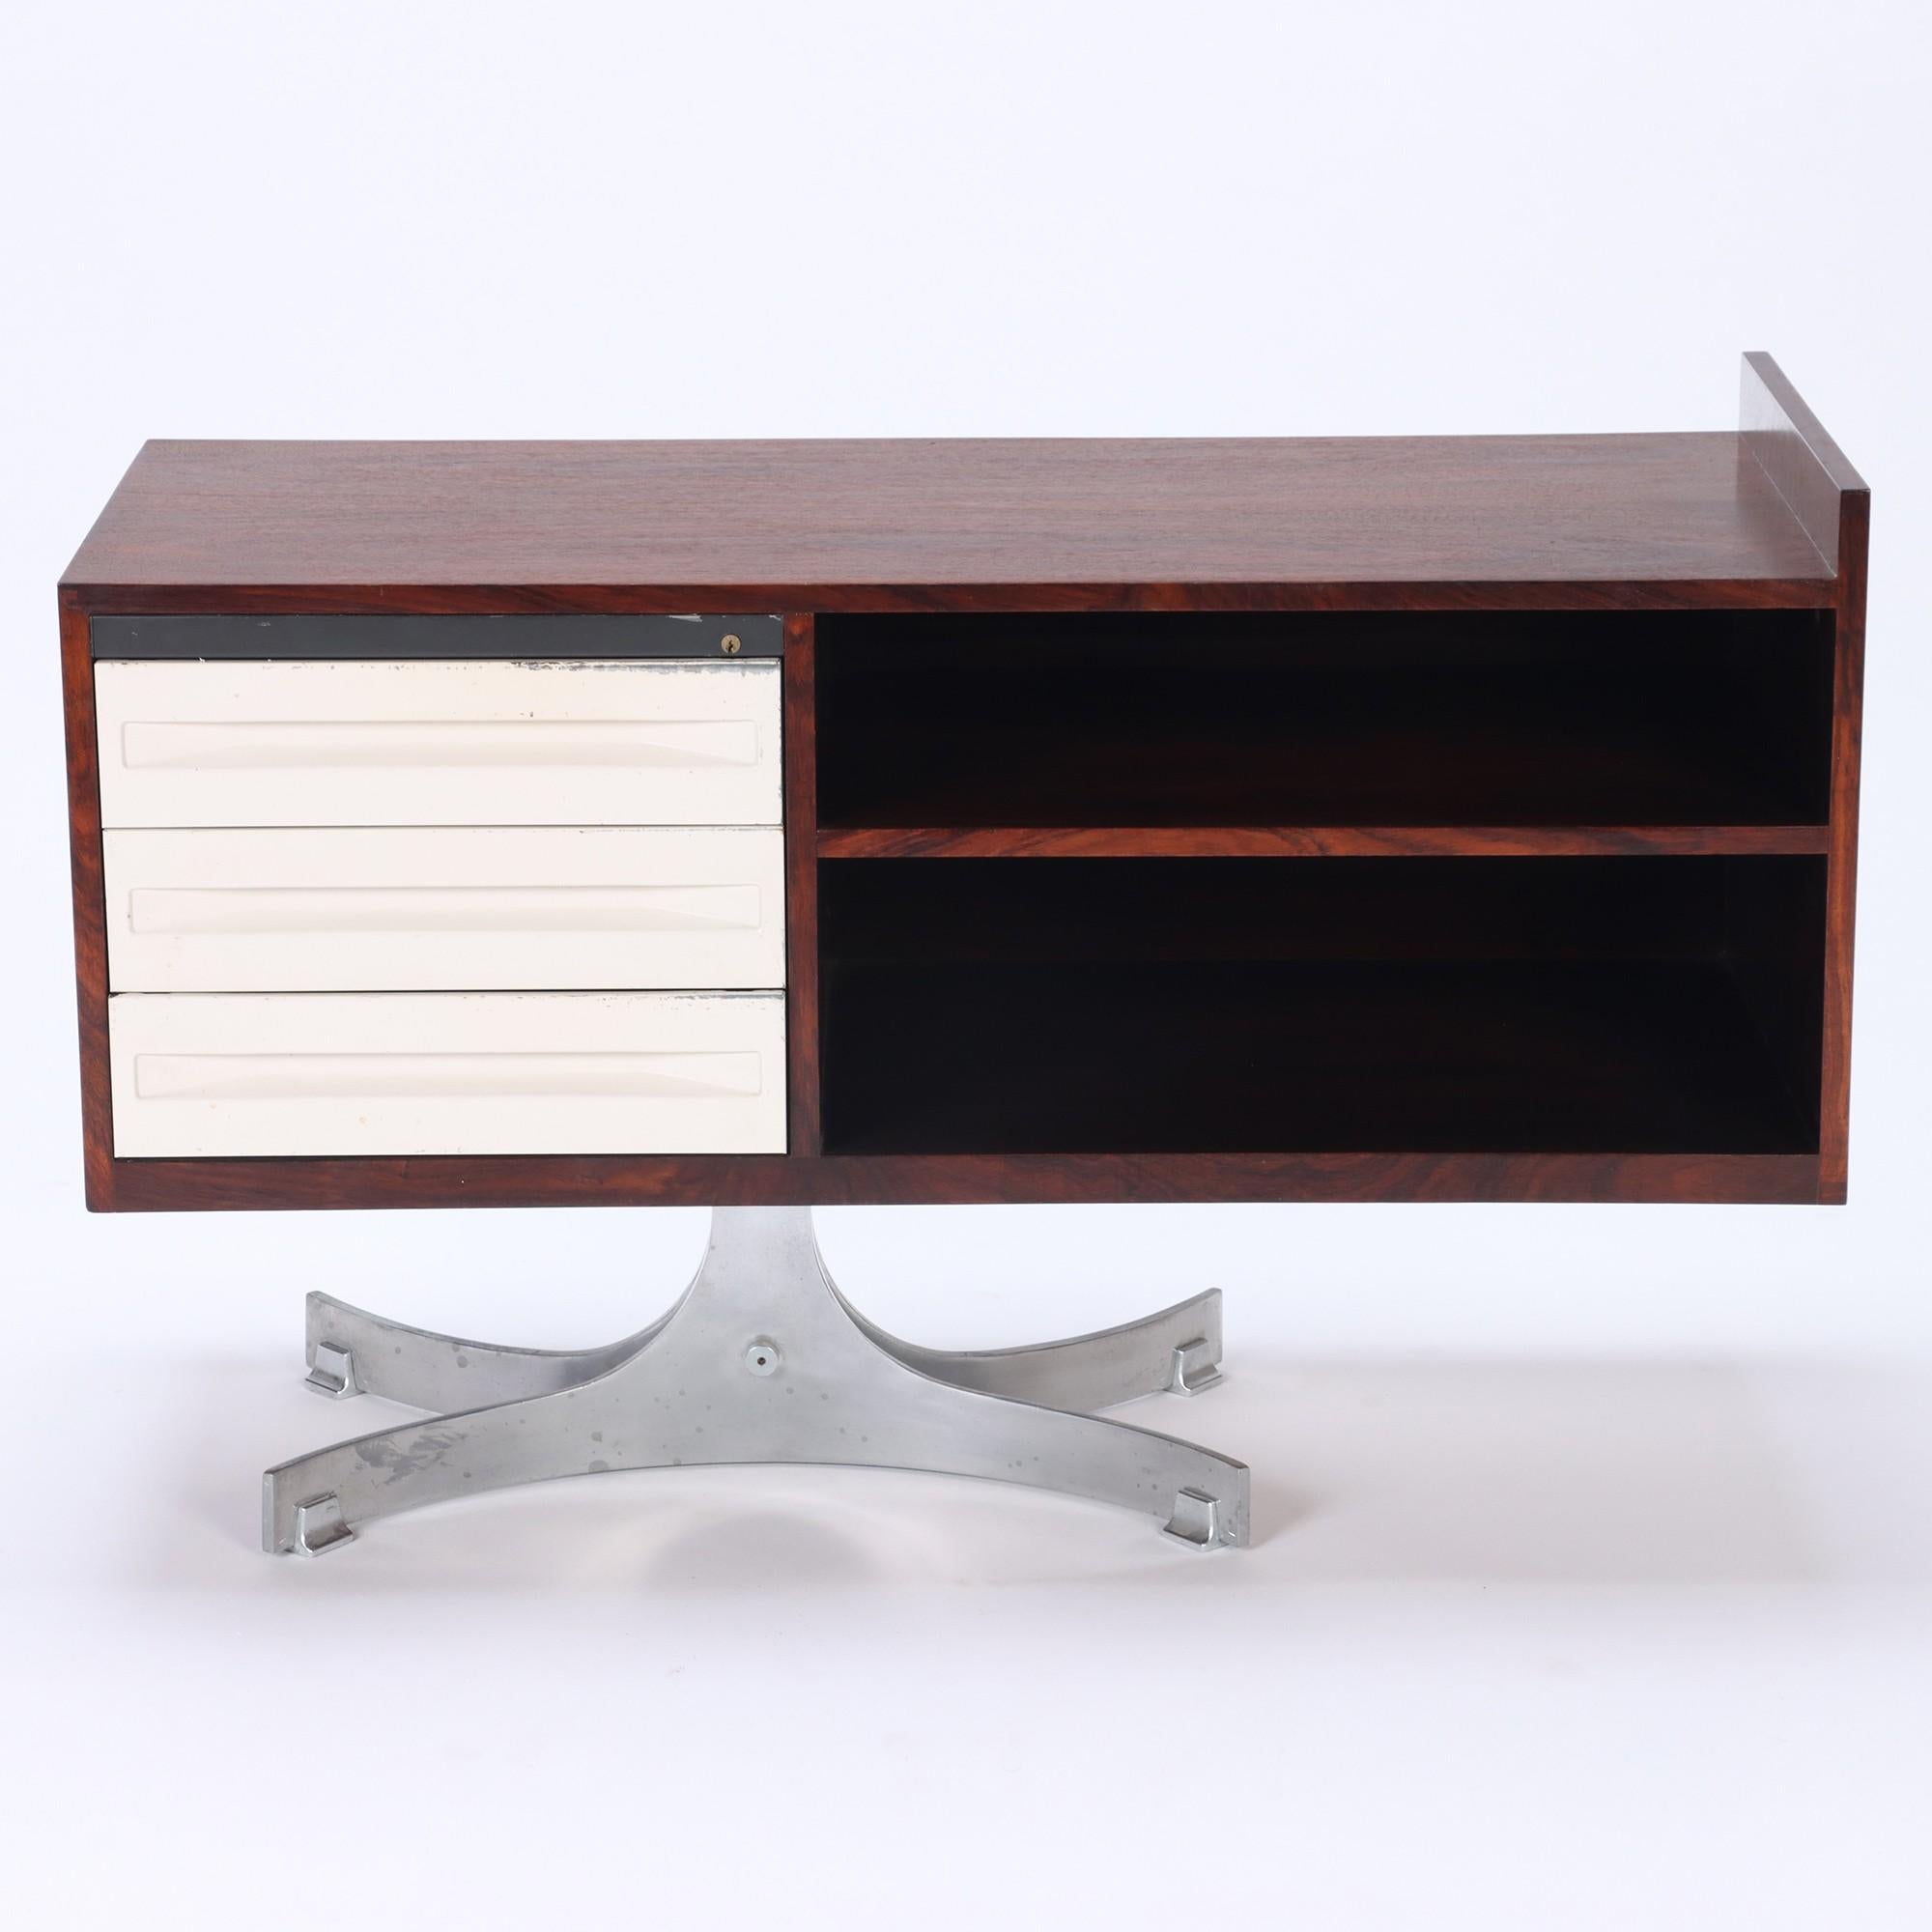 A Mid Century Modern Italian two part L shaped desk, rosewood with metal drawers. The desks rest on a base of curved metal legs. The smaller desk offers two open shelves and three drawers for storage (28